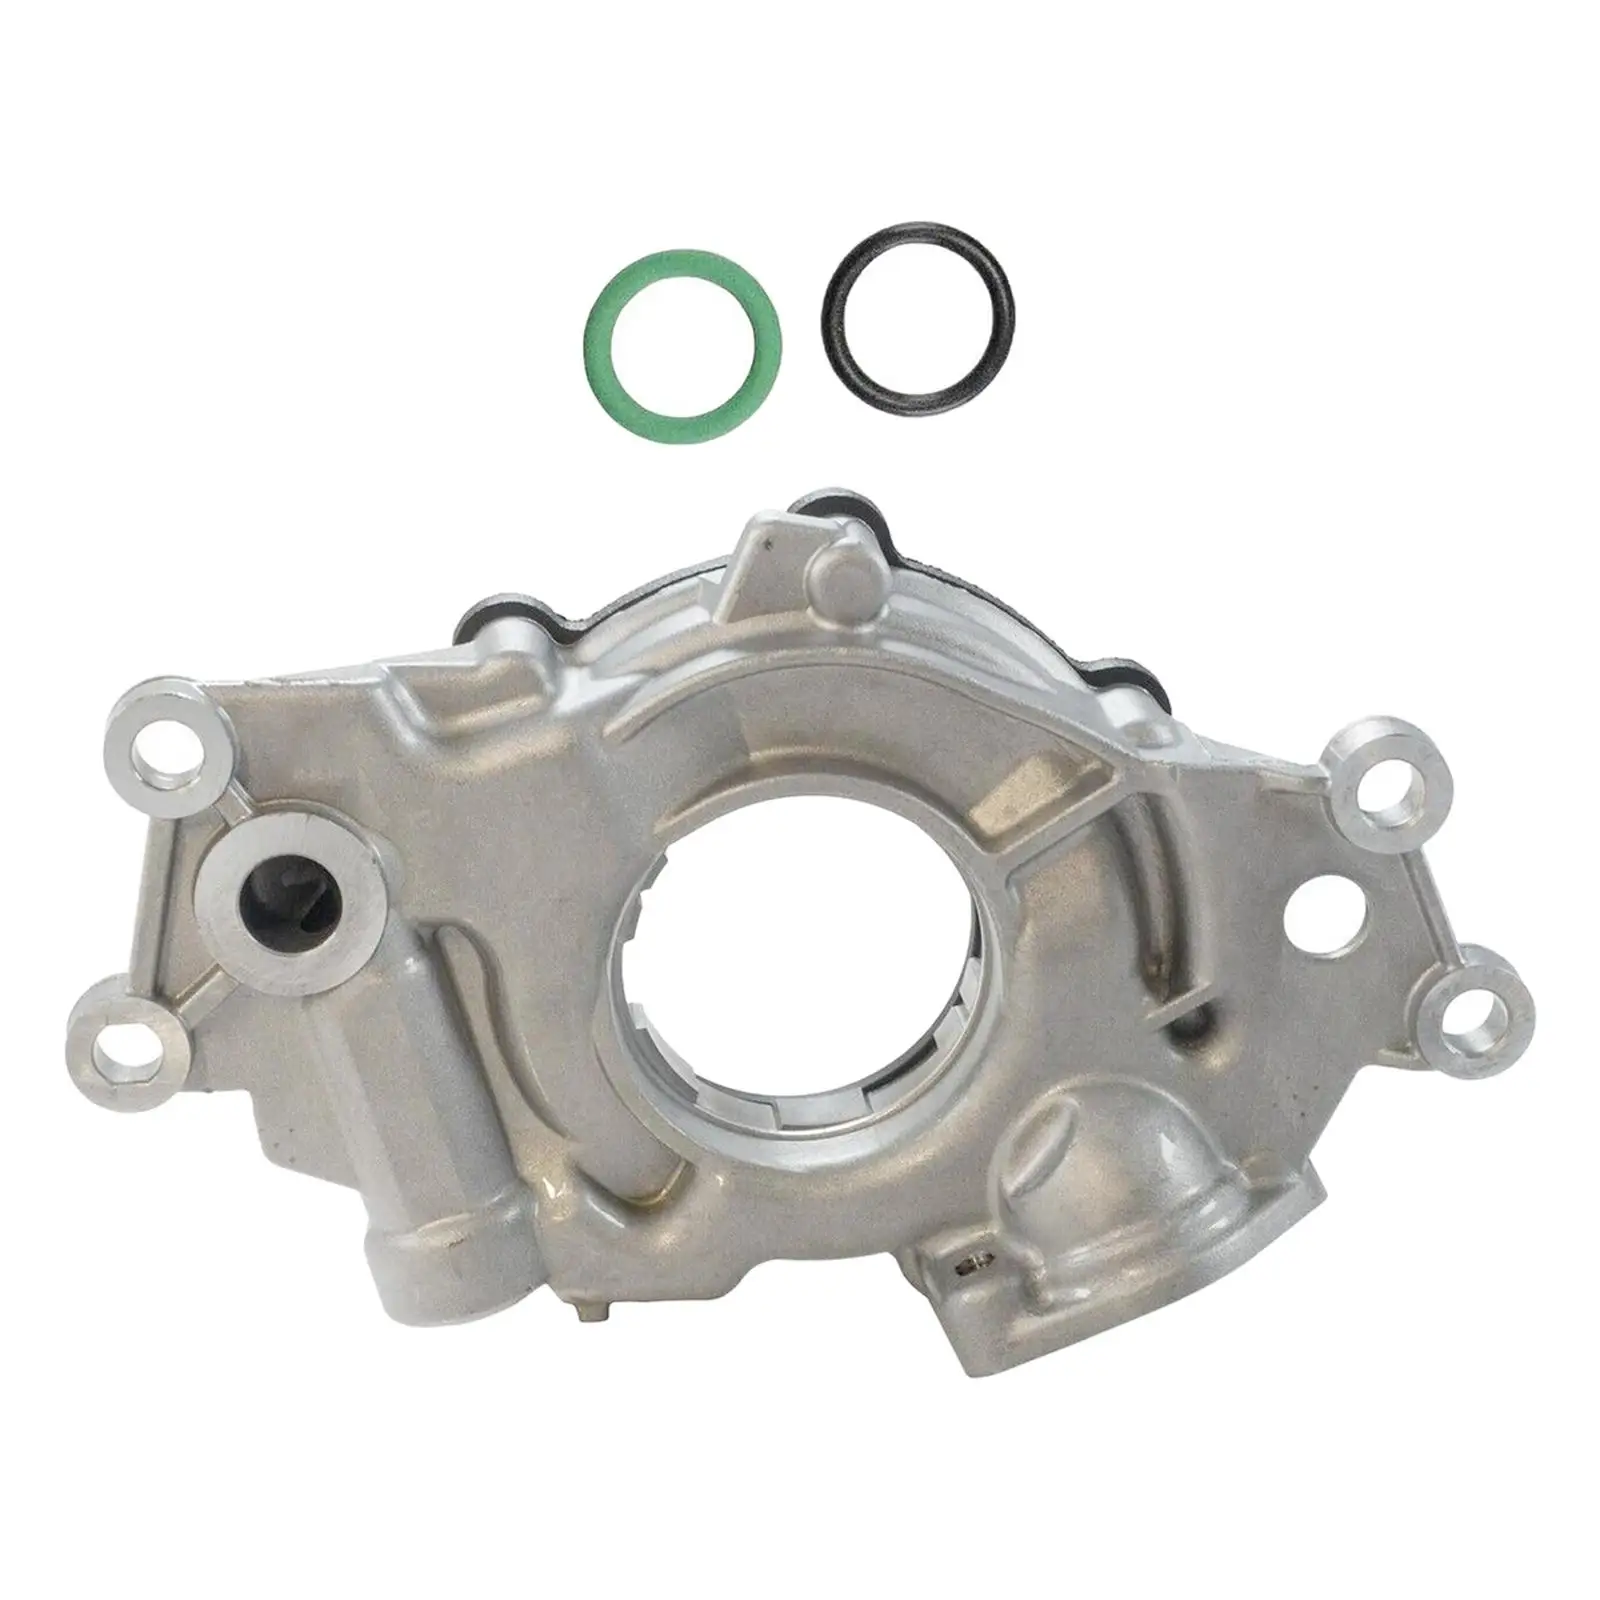 Engine Oil Pump High Performance Quality Direct Replace High Volume Oil Pumps Auto Accessories for LH6 LS4 Lmf L77 LH9